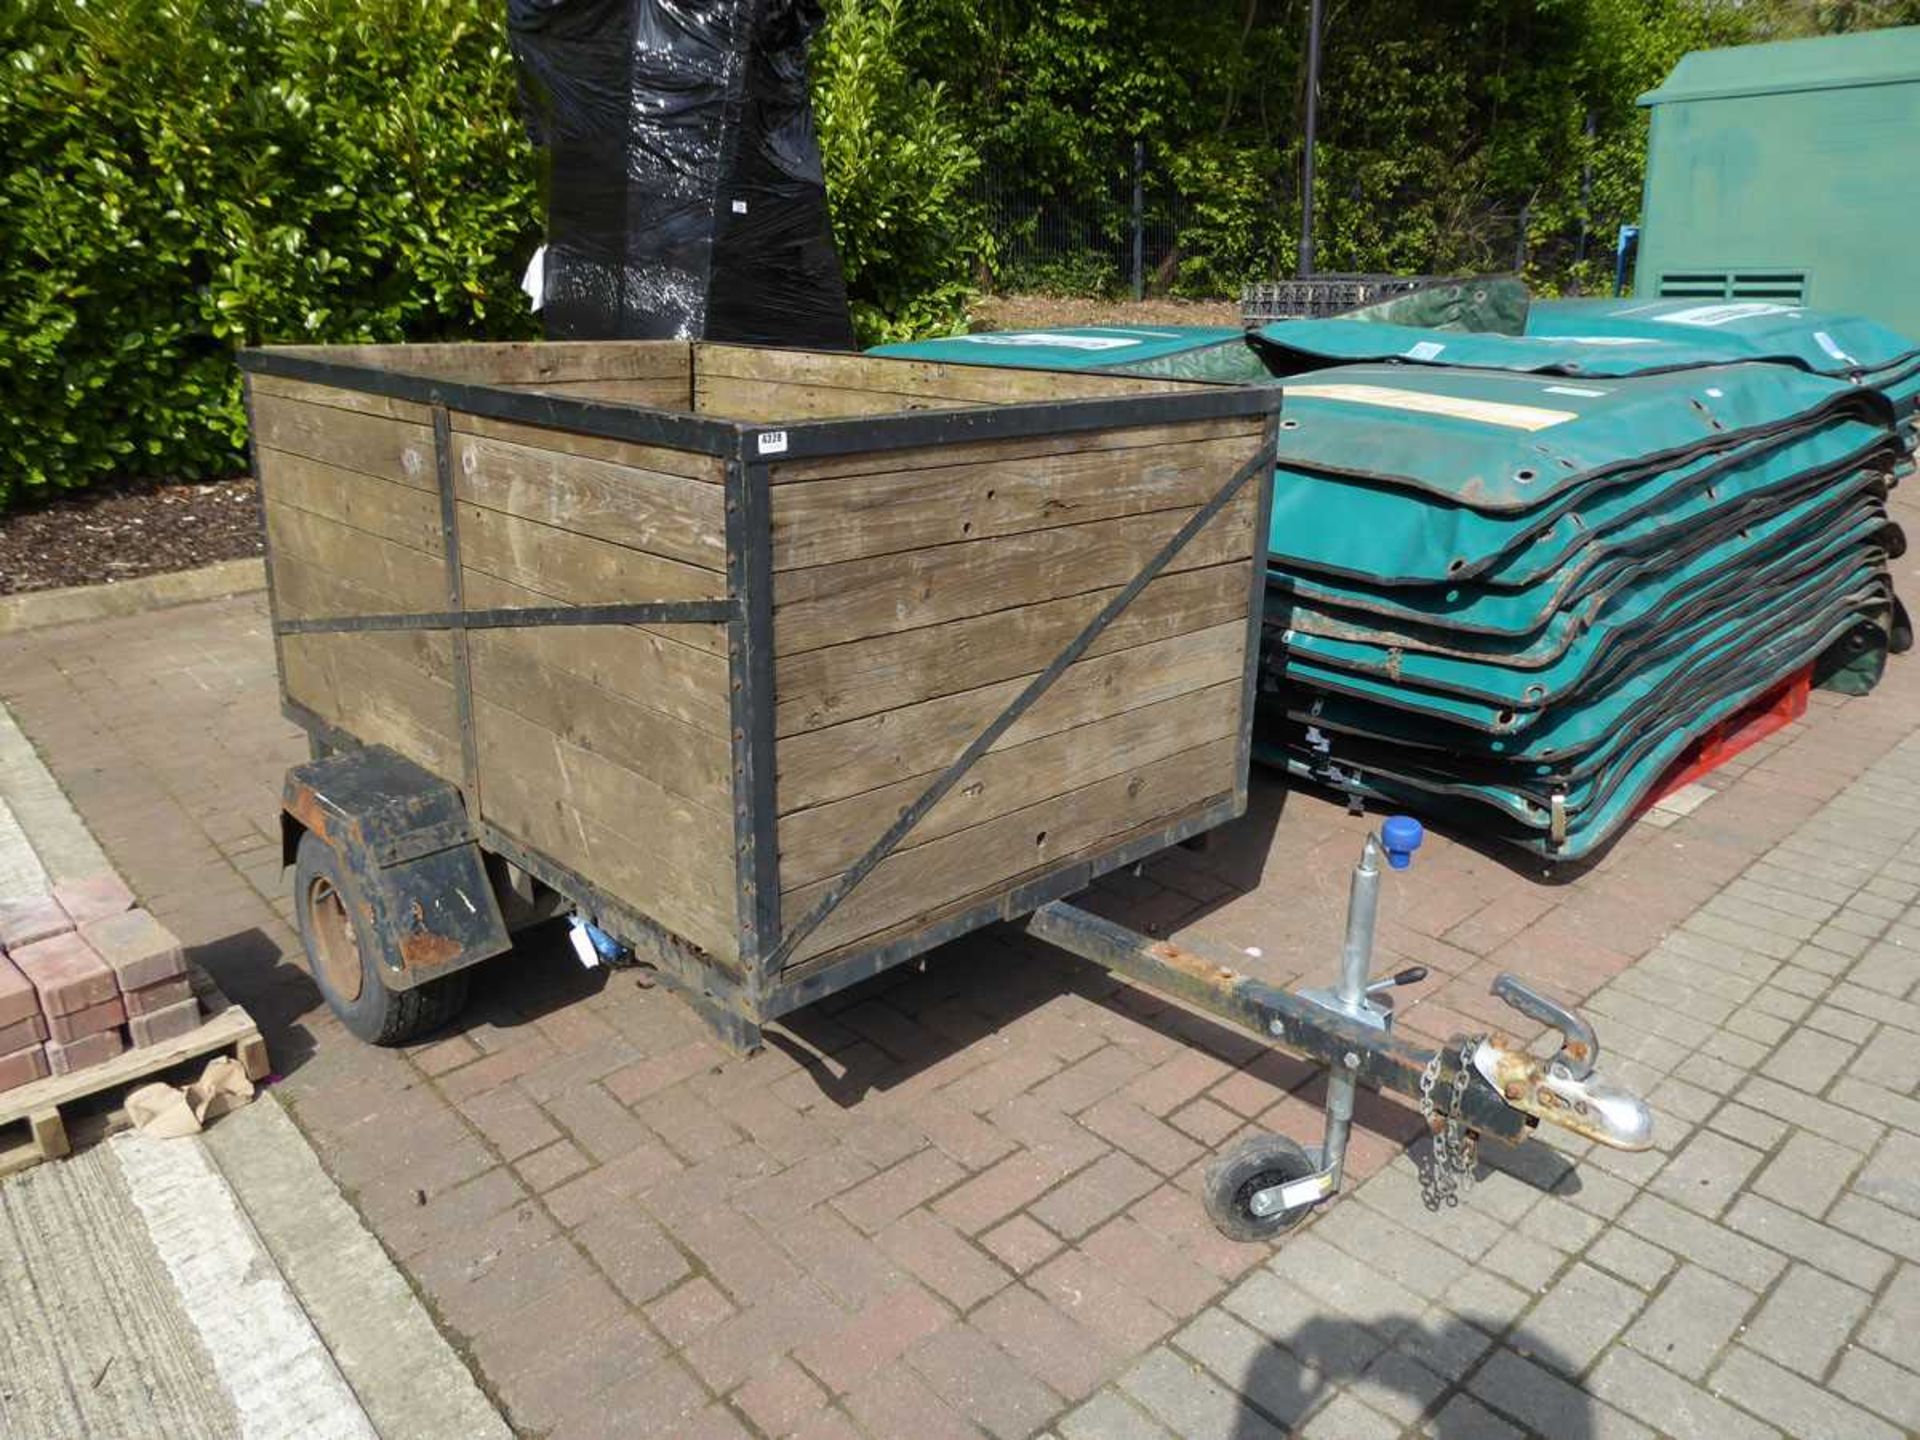 Single axle metal and wooden framed trailer (1 tyre missing)